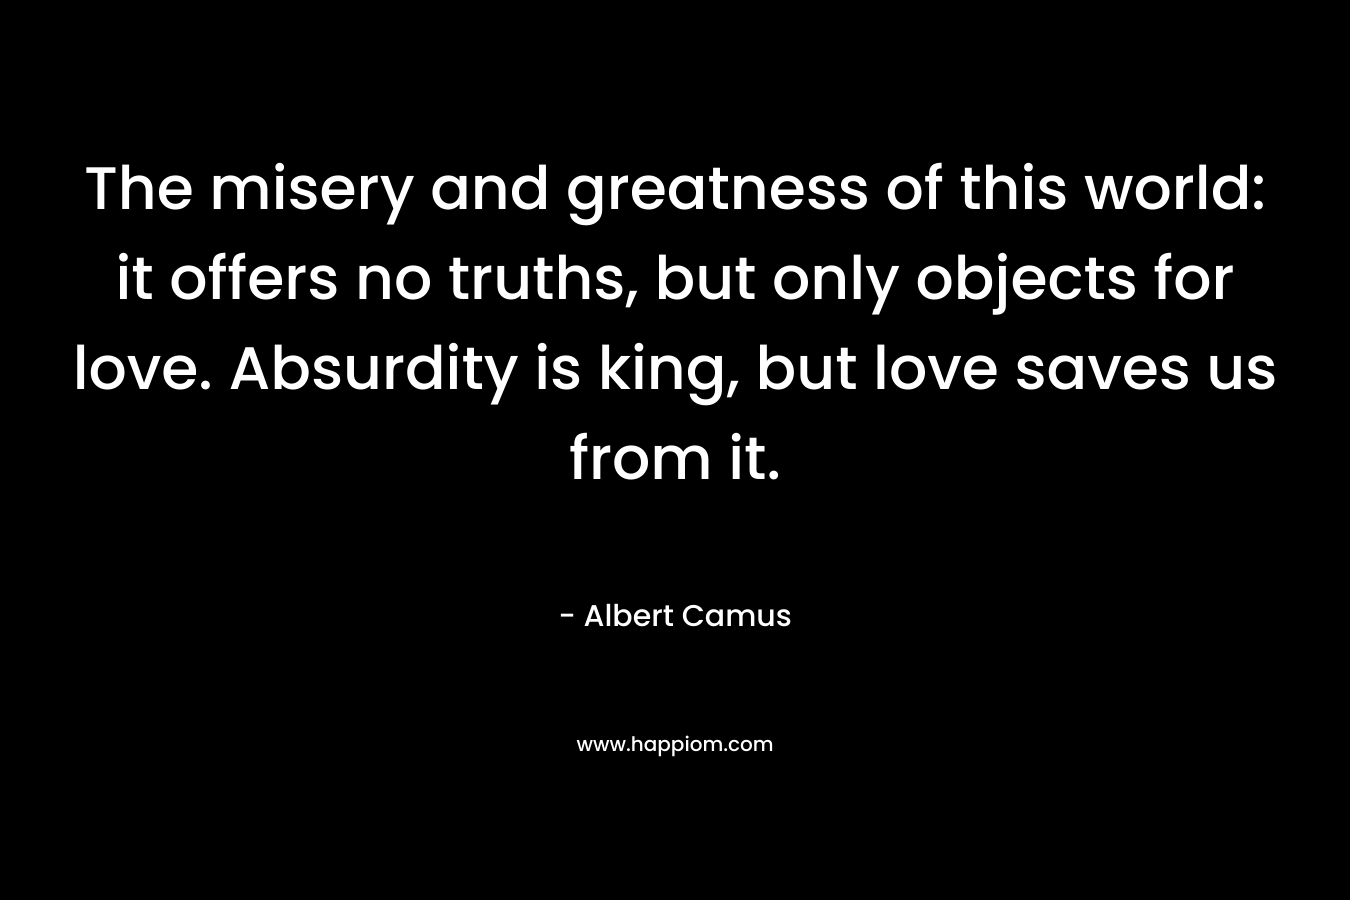 The misery and greatness of this world: it offers no truths, but only objects for love. Absurdity is king, but love saves us from it.